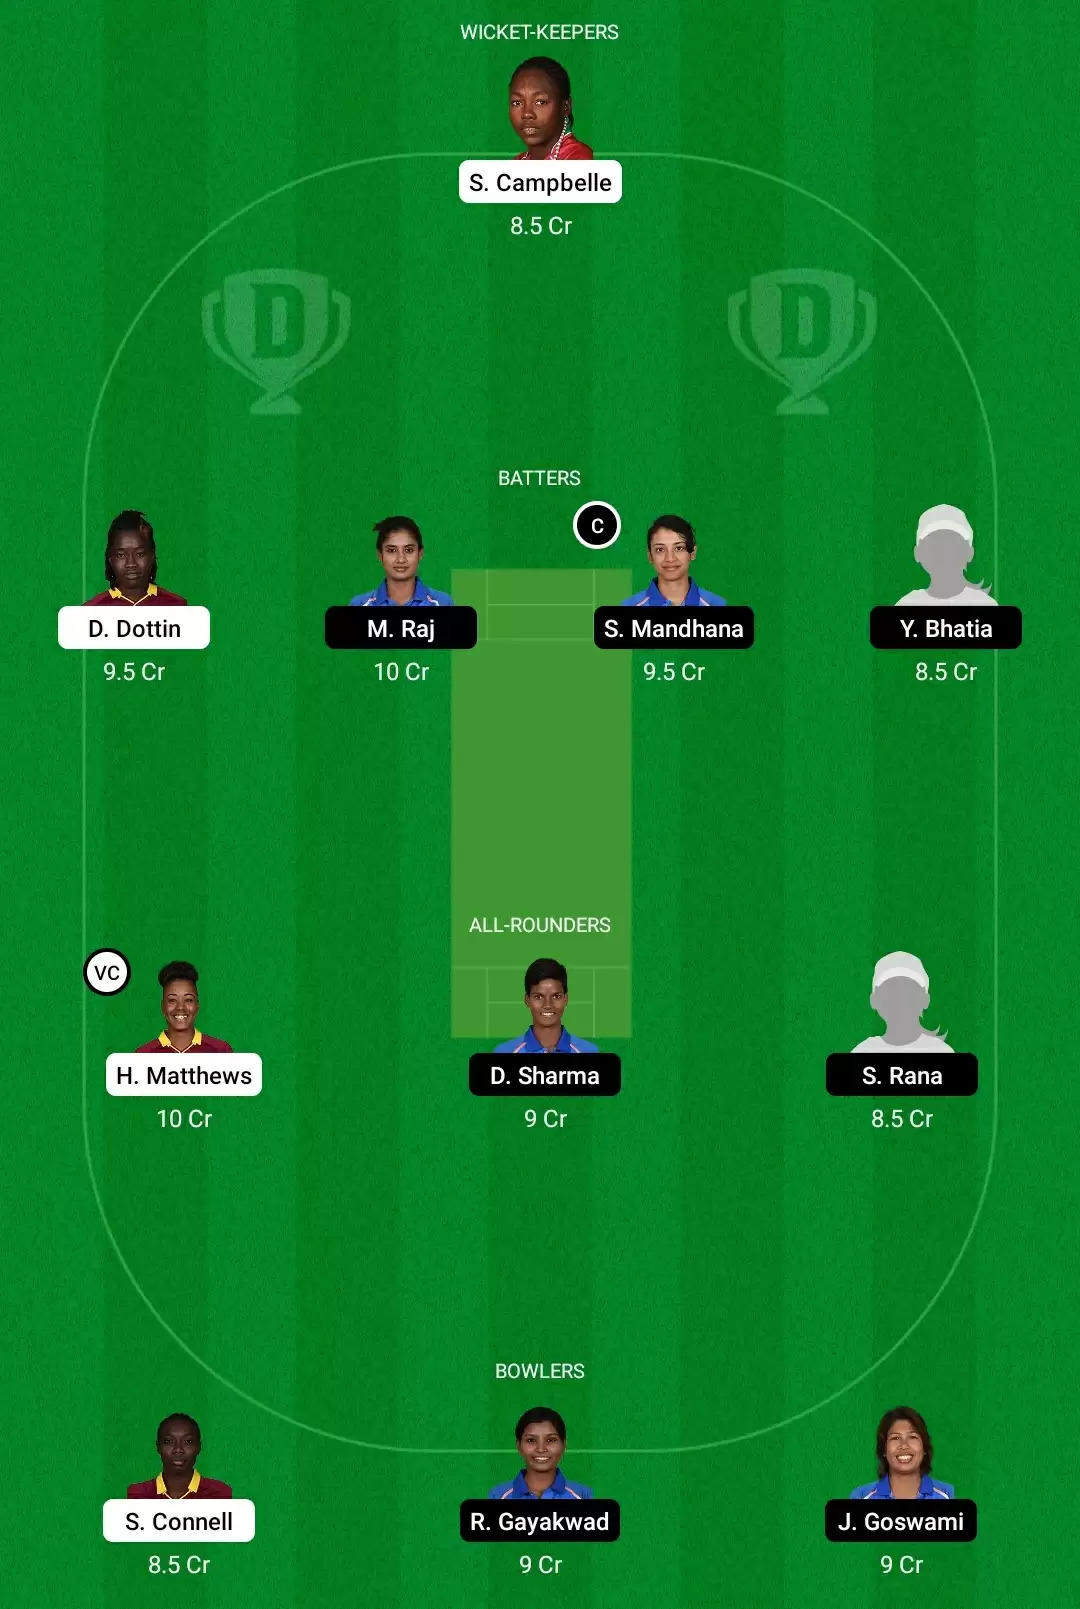 WI-W Vs IN-W Dream11 Prediction, Fantasy Cricket Tips, Playing XI, Dream11 Team, Pitch And Weather Report – West Indies Women Vs India Women Match, ICC Women’s World Cup 2022